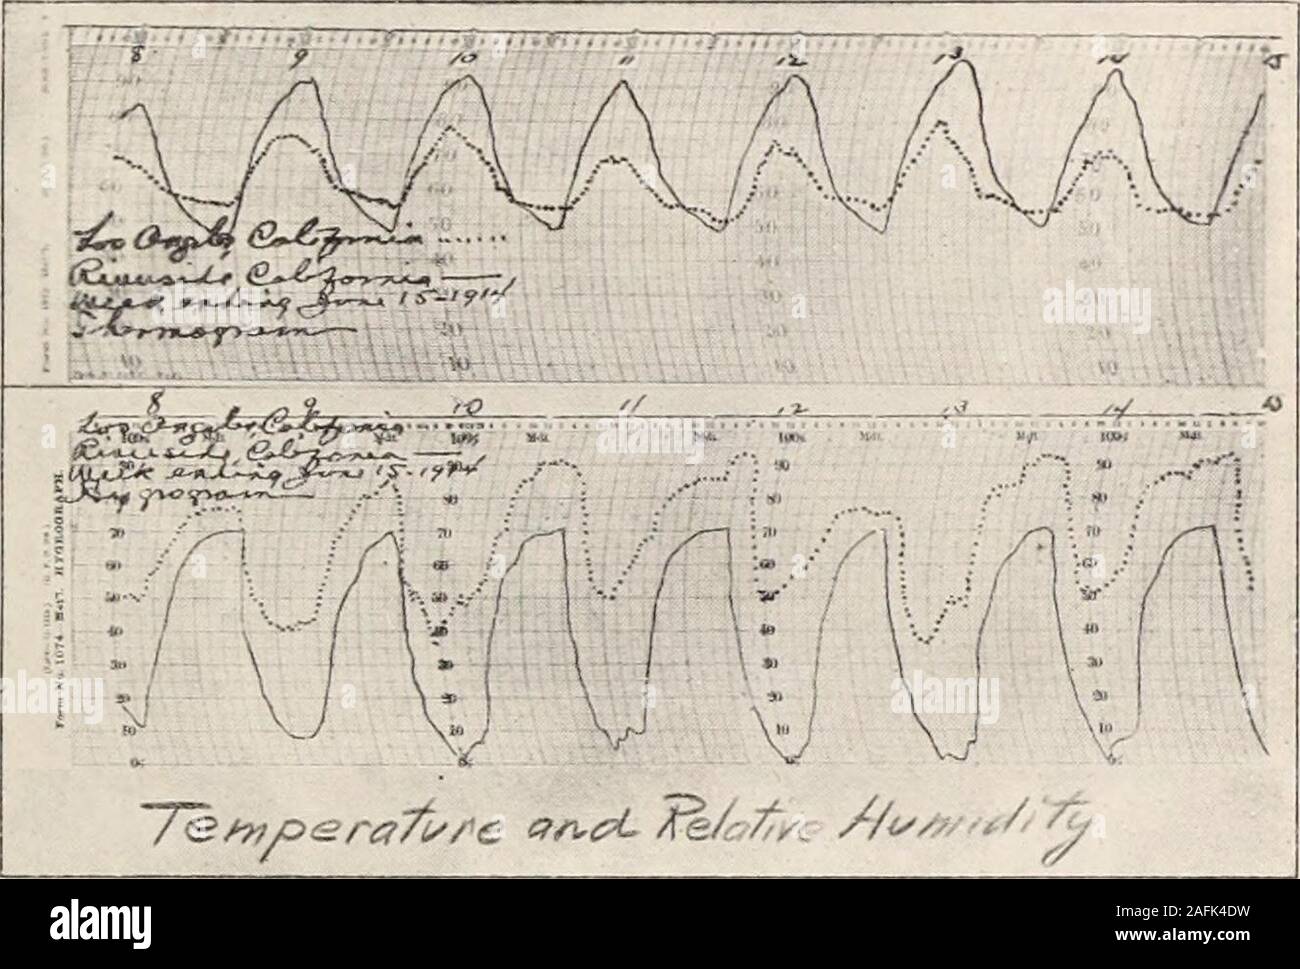 . Transactions of the American Climatological and Clinical Association.. may befound all kinds of varieties of healthful weather. This isowing to the mountains, the sea and the desert, as well asthe latitude. Scattered over this one portion of Californiaare a dozen stations equipped with thermographs and hygro-graphs, rain-gauges, &c. An examination of the curves oftemperature and relative humidity as automaticallv tracedis a most interesting study. Two sets of these curves areillustrated in fig. 2, p. 23. They show simultaneoustracings of temperature and relative humidity during a weekin June Stock Photo